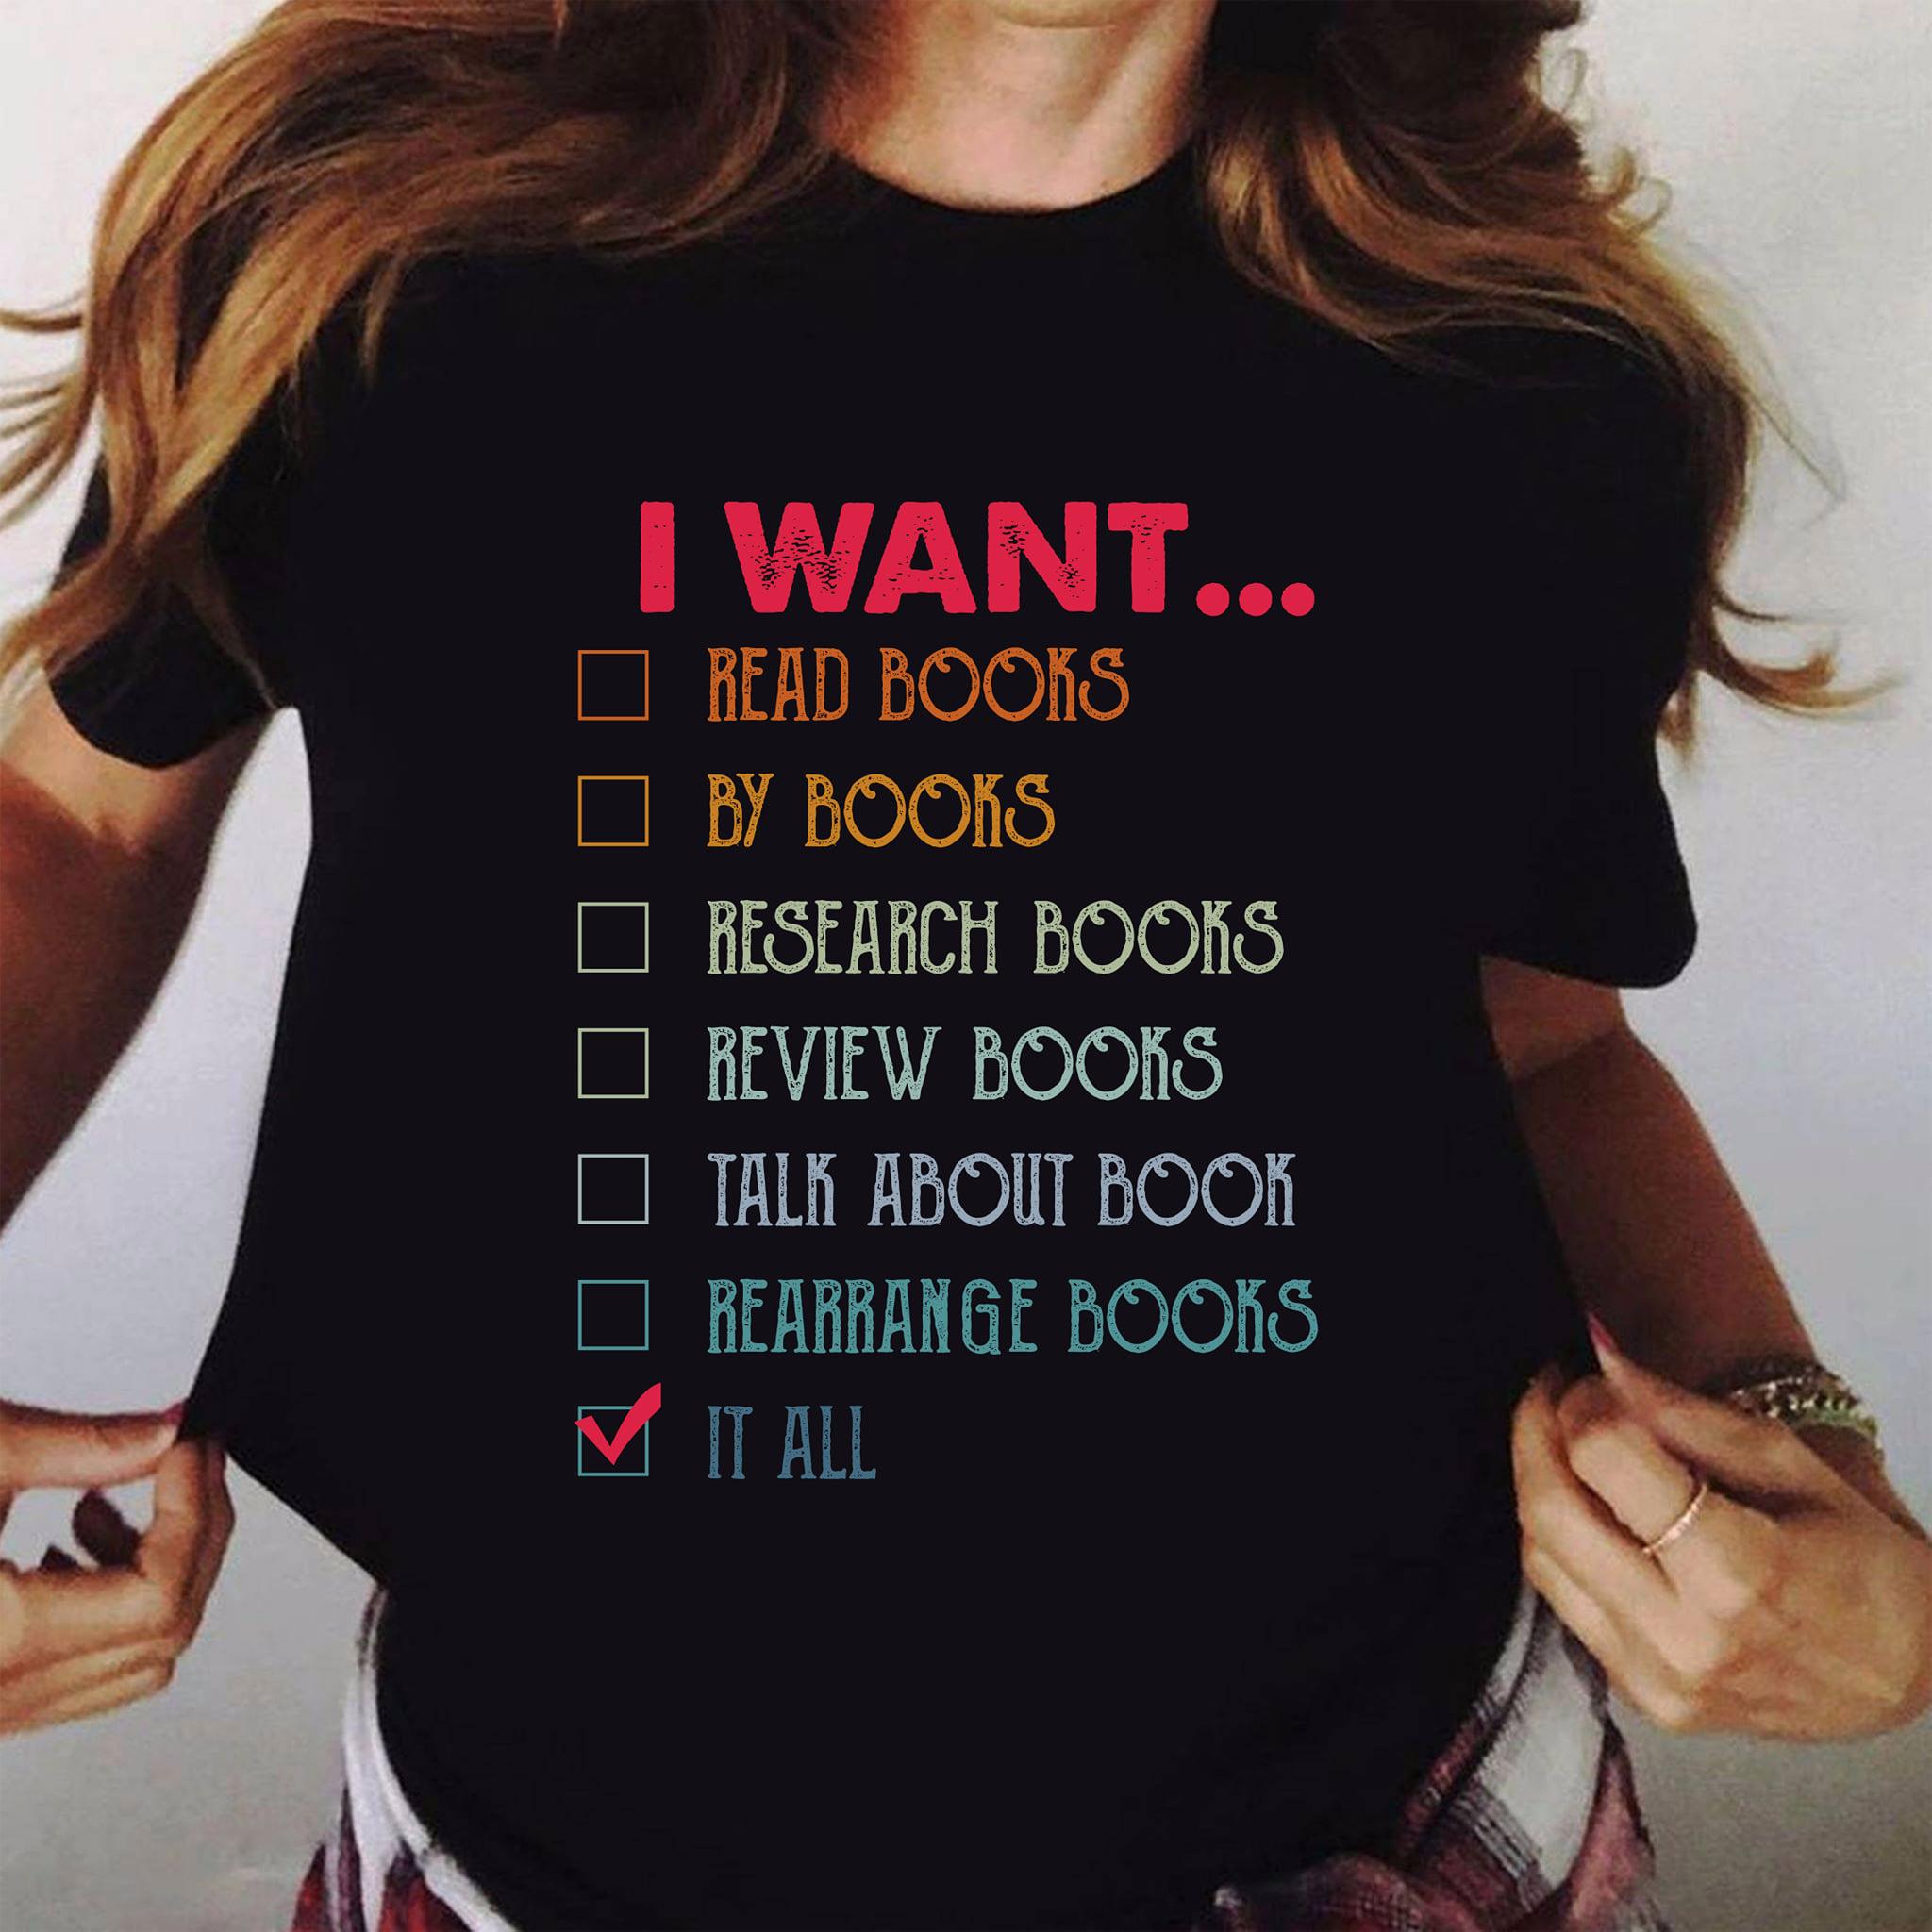 I want read books, research books, review books, talk about book, rearrange books - Gift for book lover